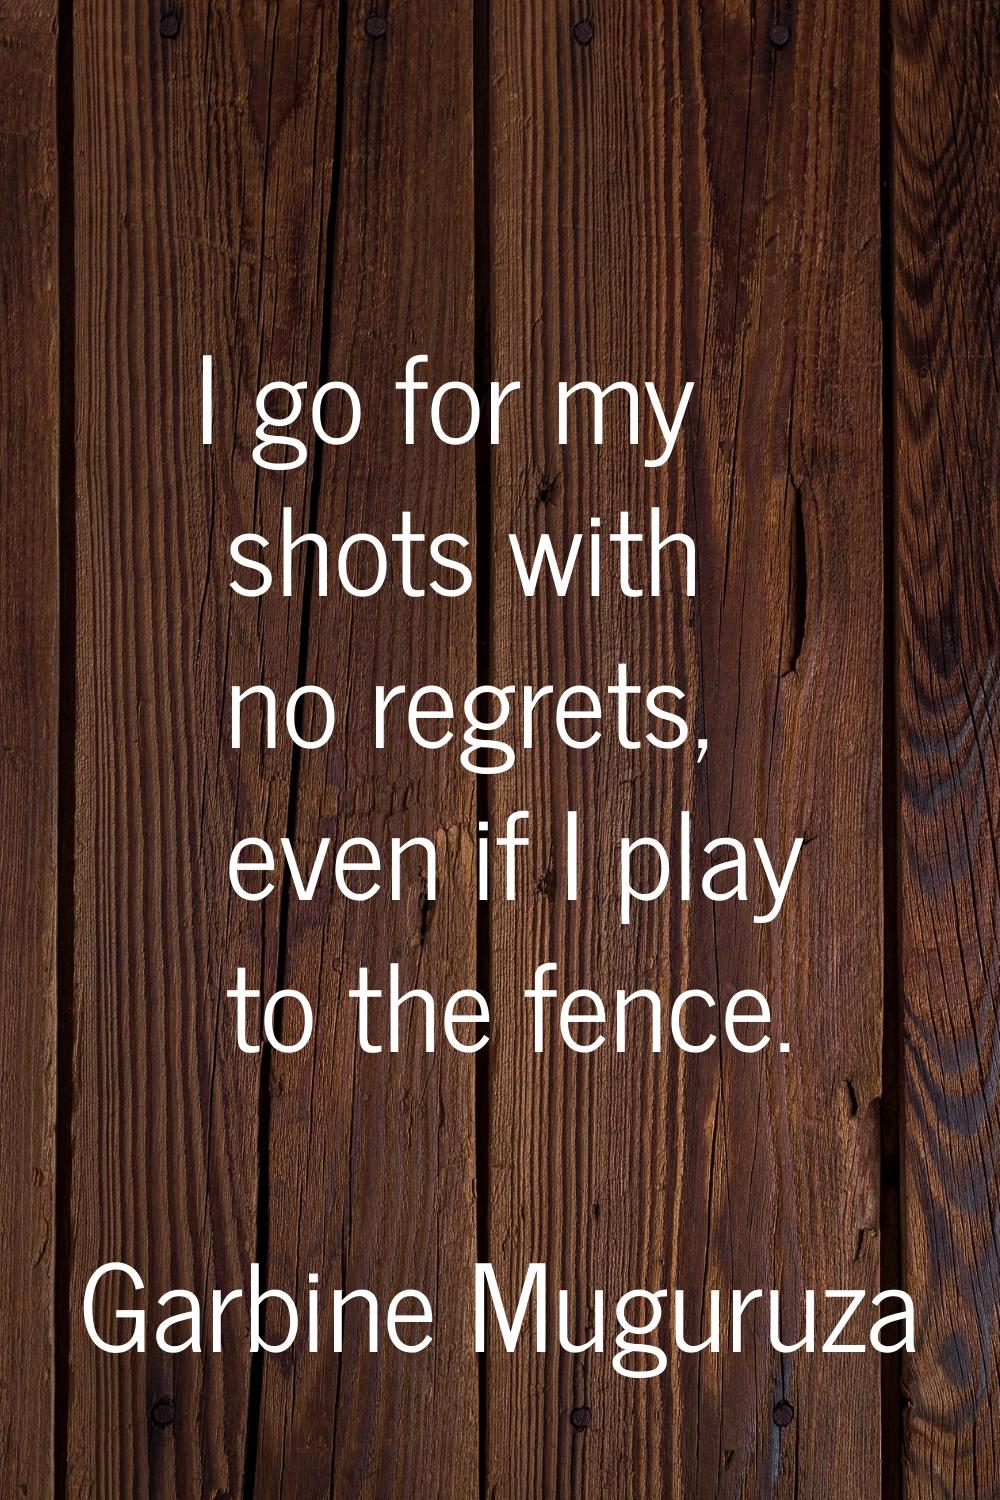 I go for my shots with no regrets, even if I play to the fence.